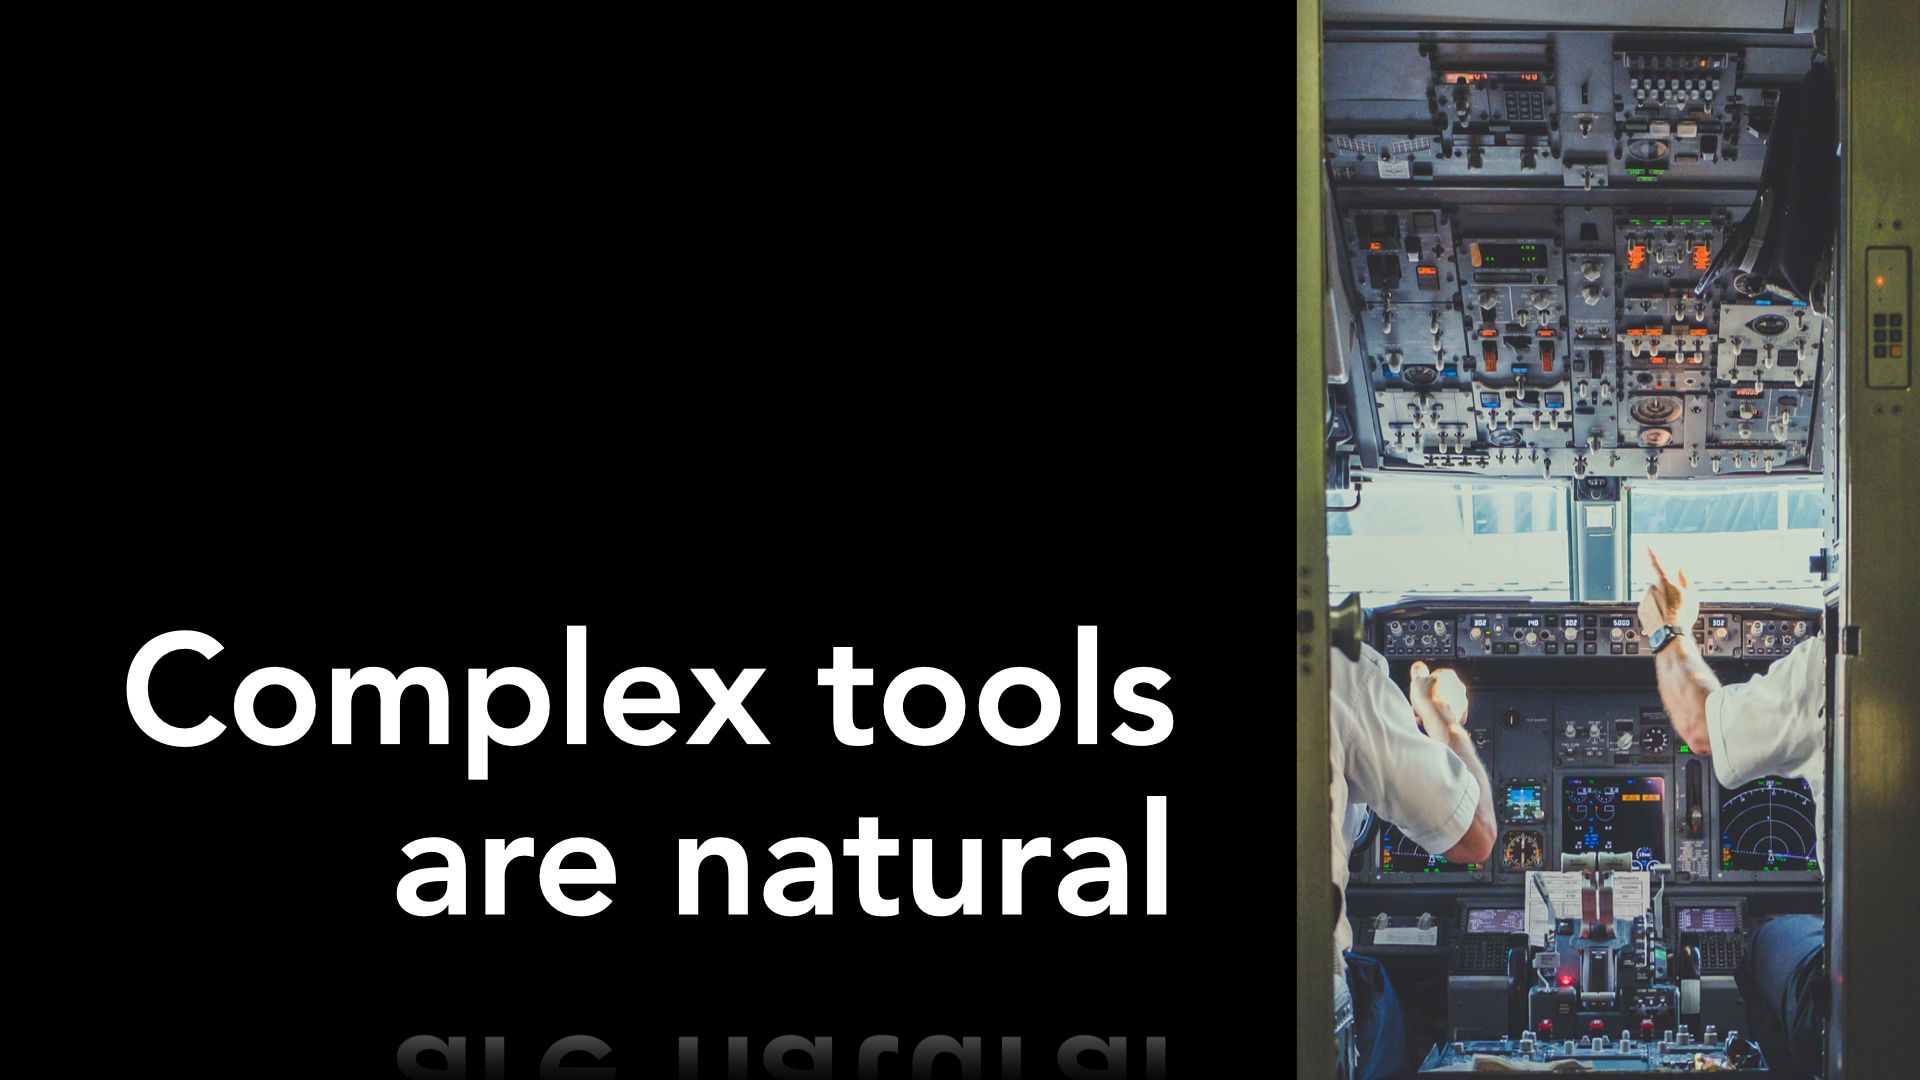 Slide text "Complex tools are natural" on plain background, with image of airplane cockpit to the right, with many controls